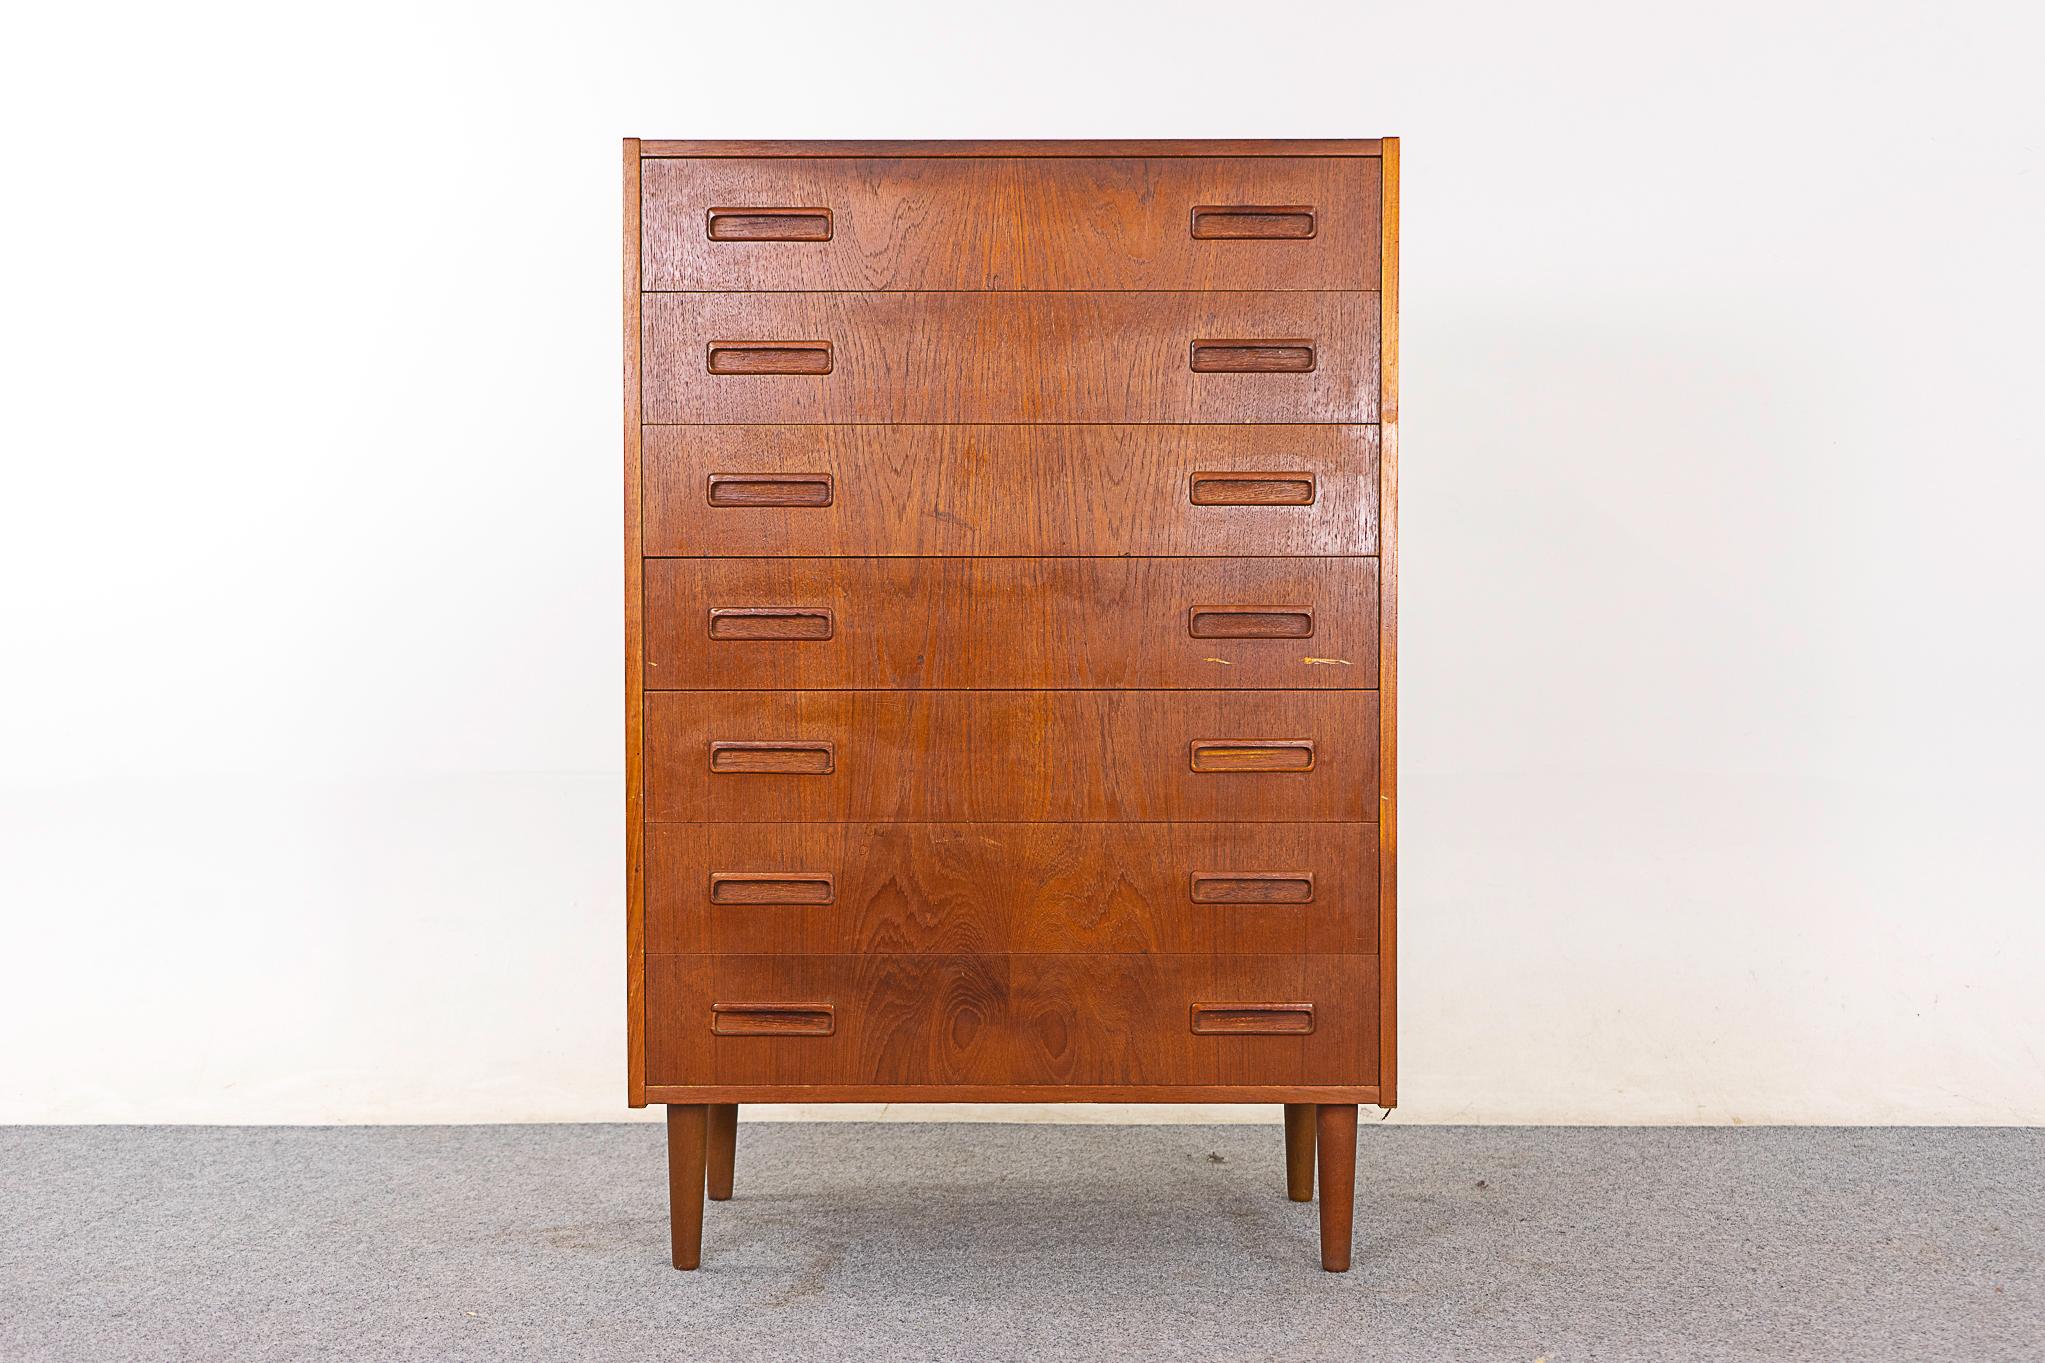 Teak mid-century dresser, circa 1960's. Stunning book-matched veneer on the drawer faces, lovely pattern matching. Slim drawers with dovetail construction and sleek handles. Solid wood elegant tapered legs. 

Unrestored item with option to purchase